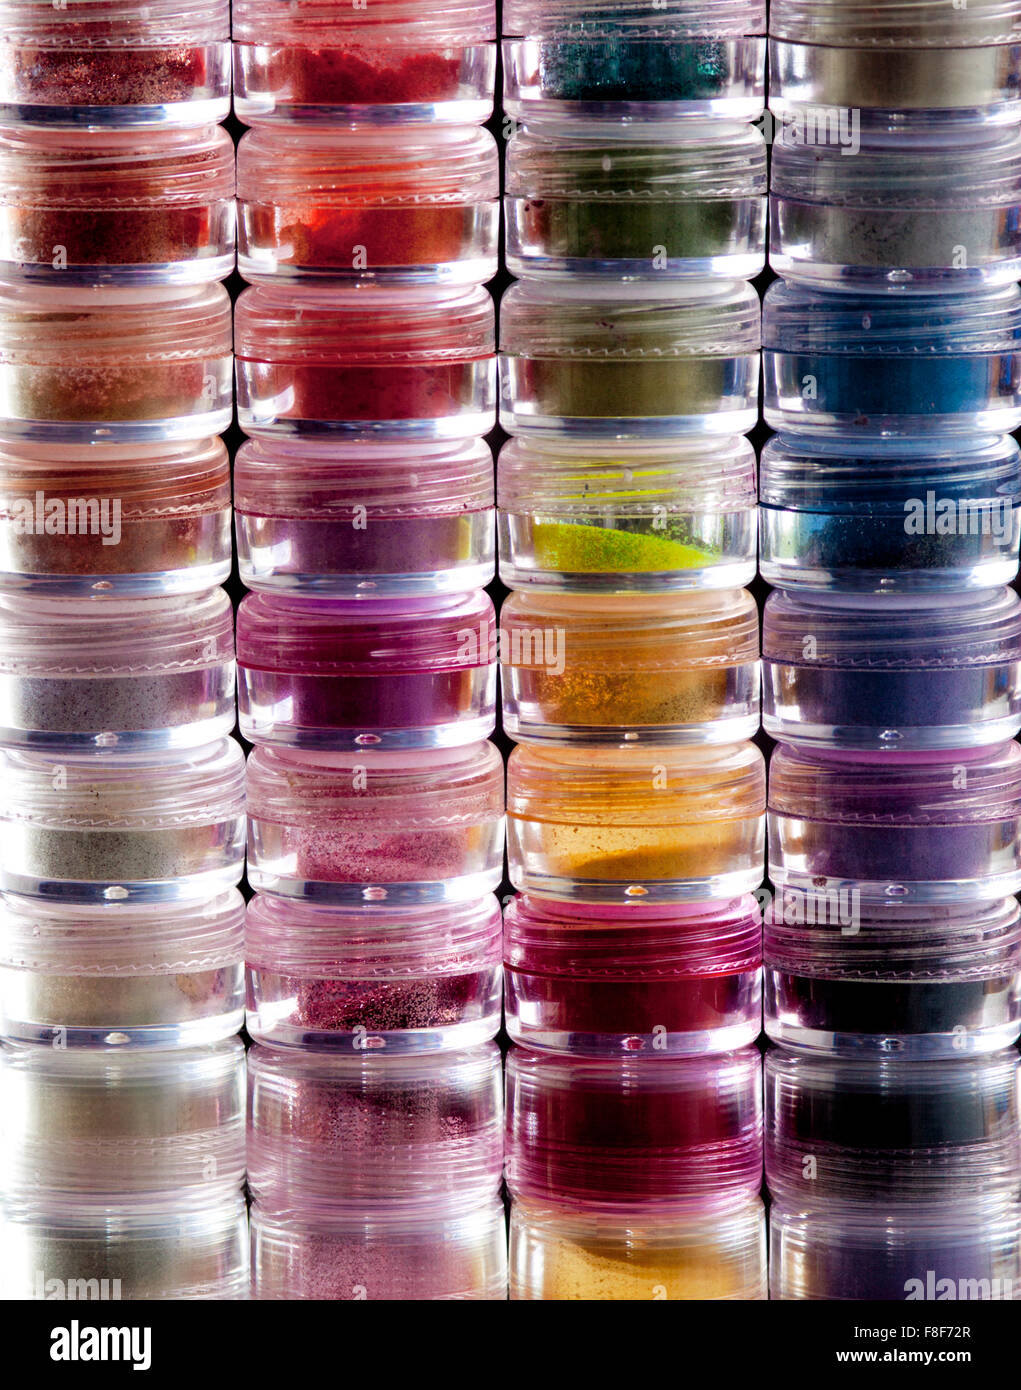 Make-up, colourful eyeshadow pigments Stock Photo